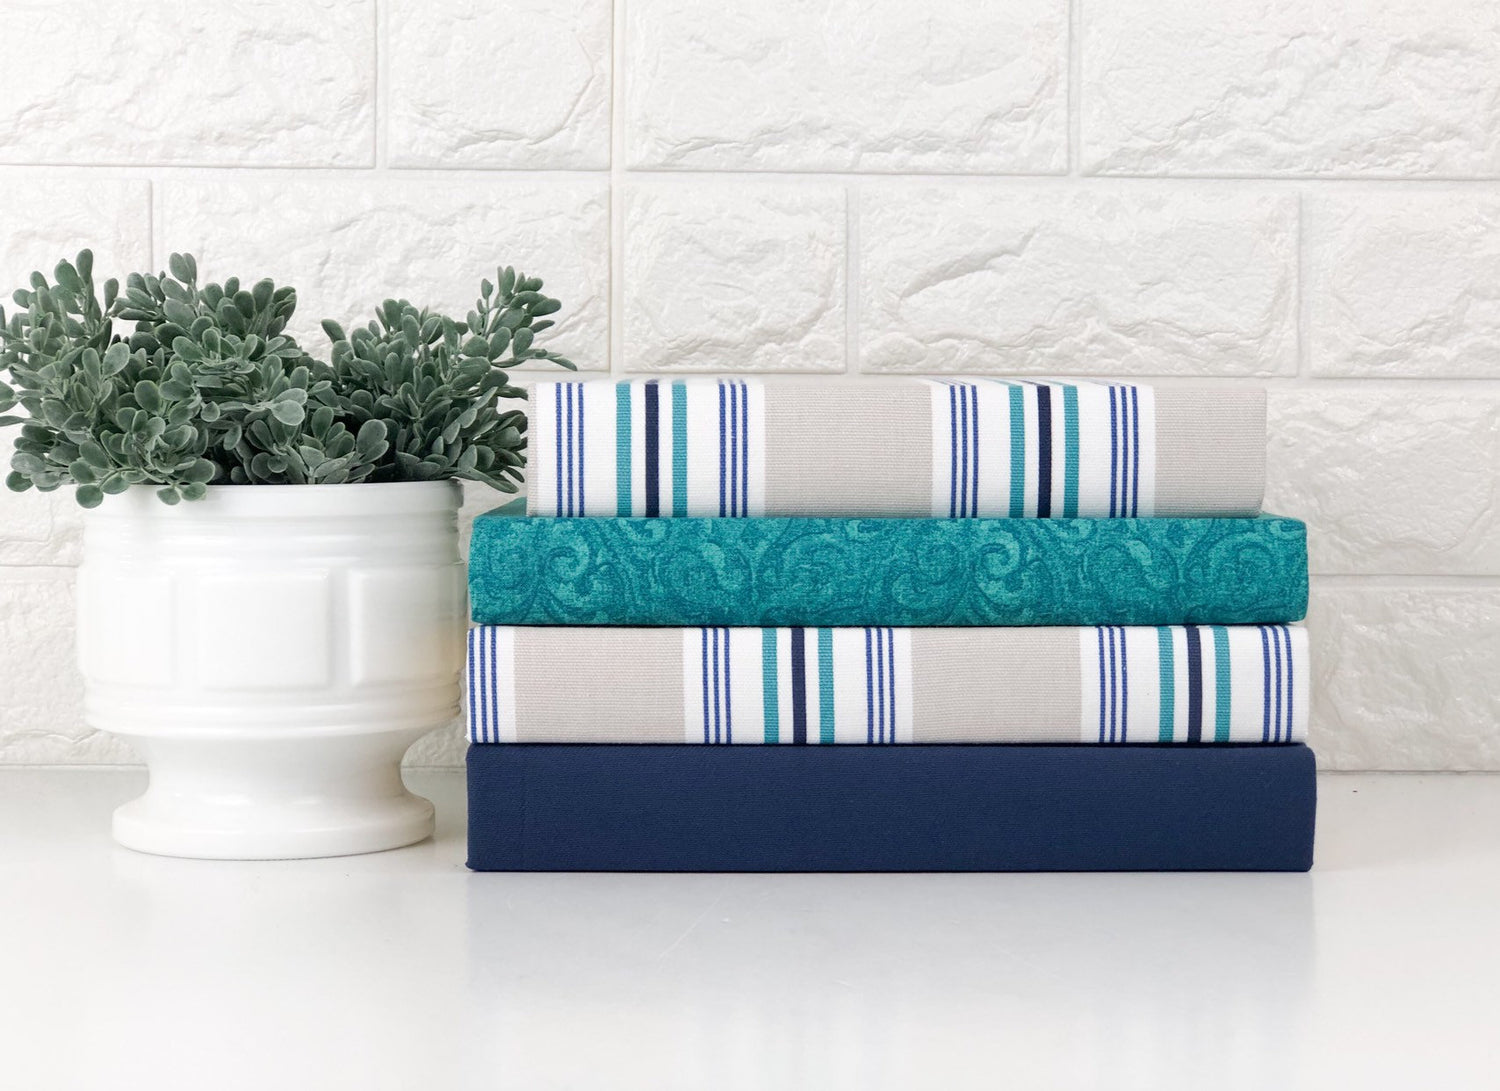 Turquoise Book Set of Home Decor